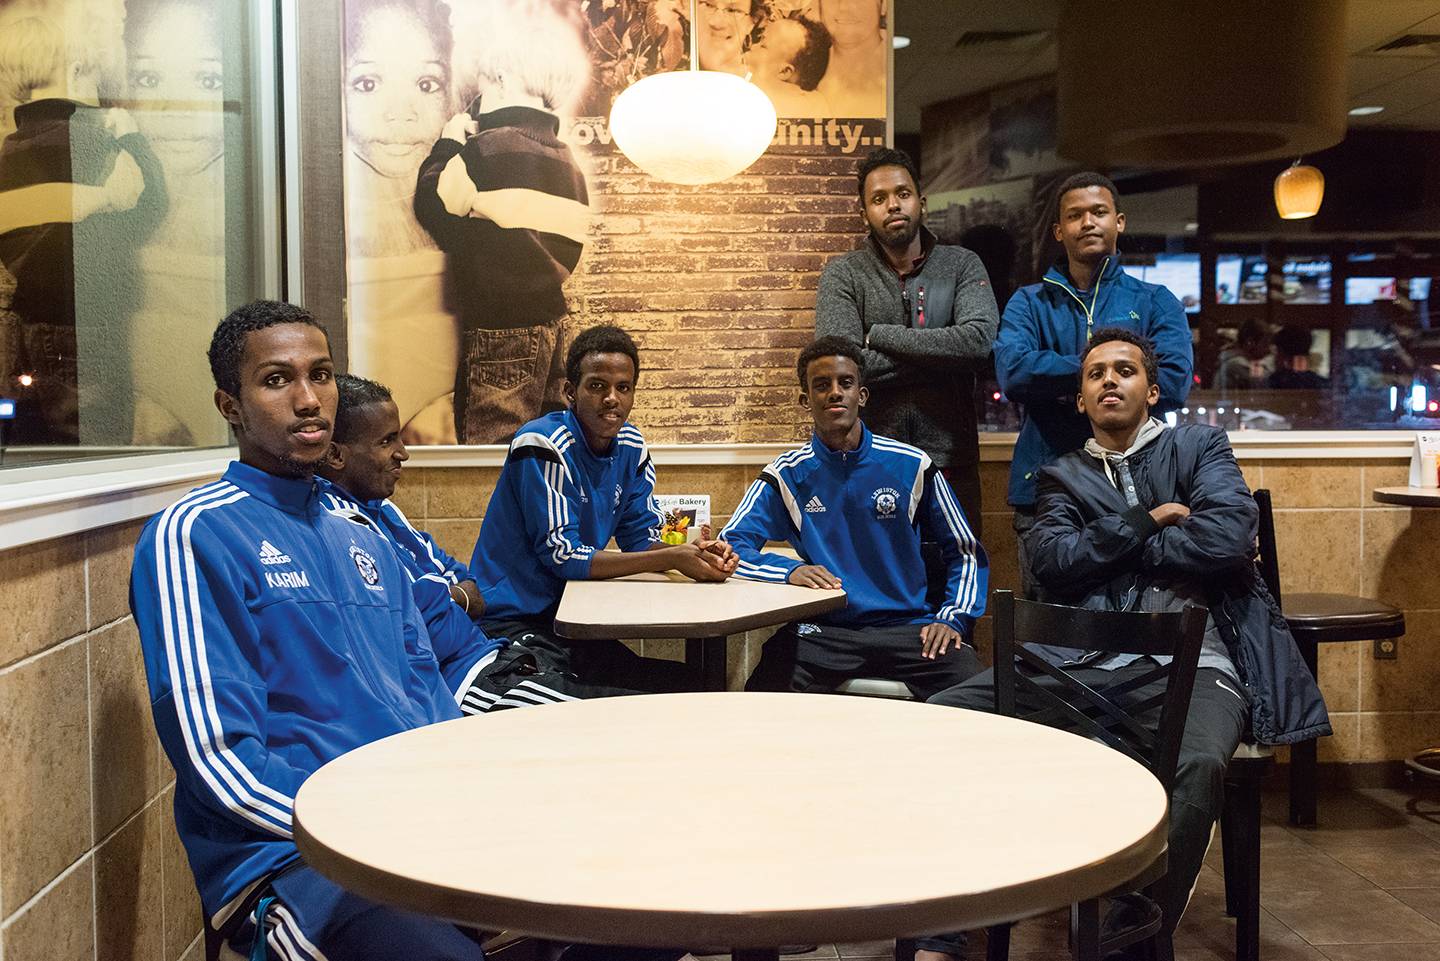 Soccer team in a fast food restaurant